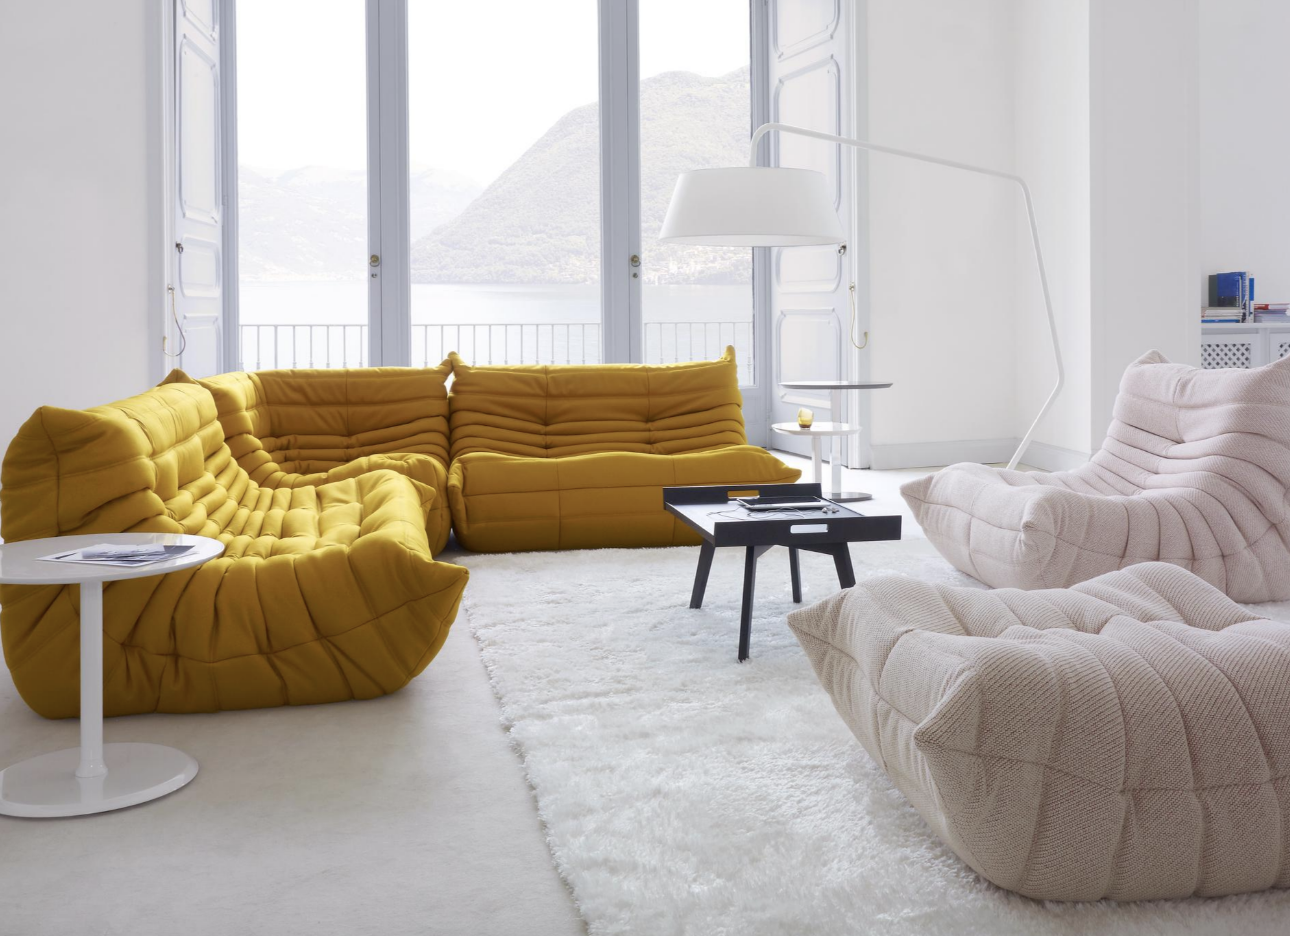 Two differently colored Togo sofas in a minimalist living room that leads to a large balcony facing a body of water